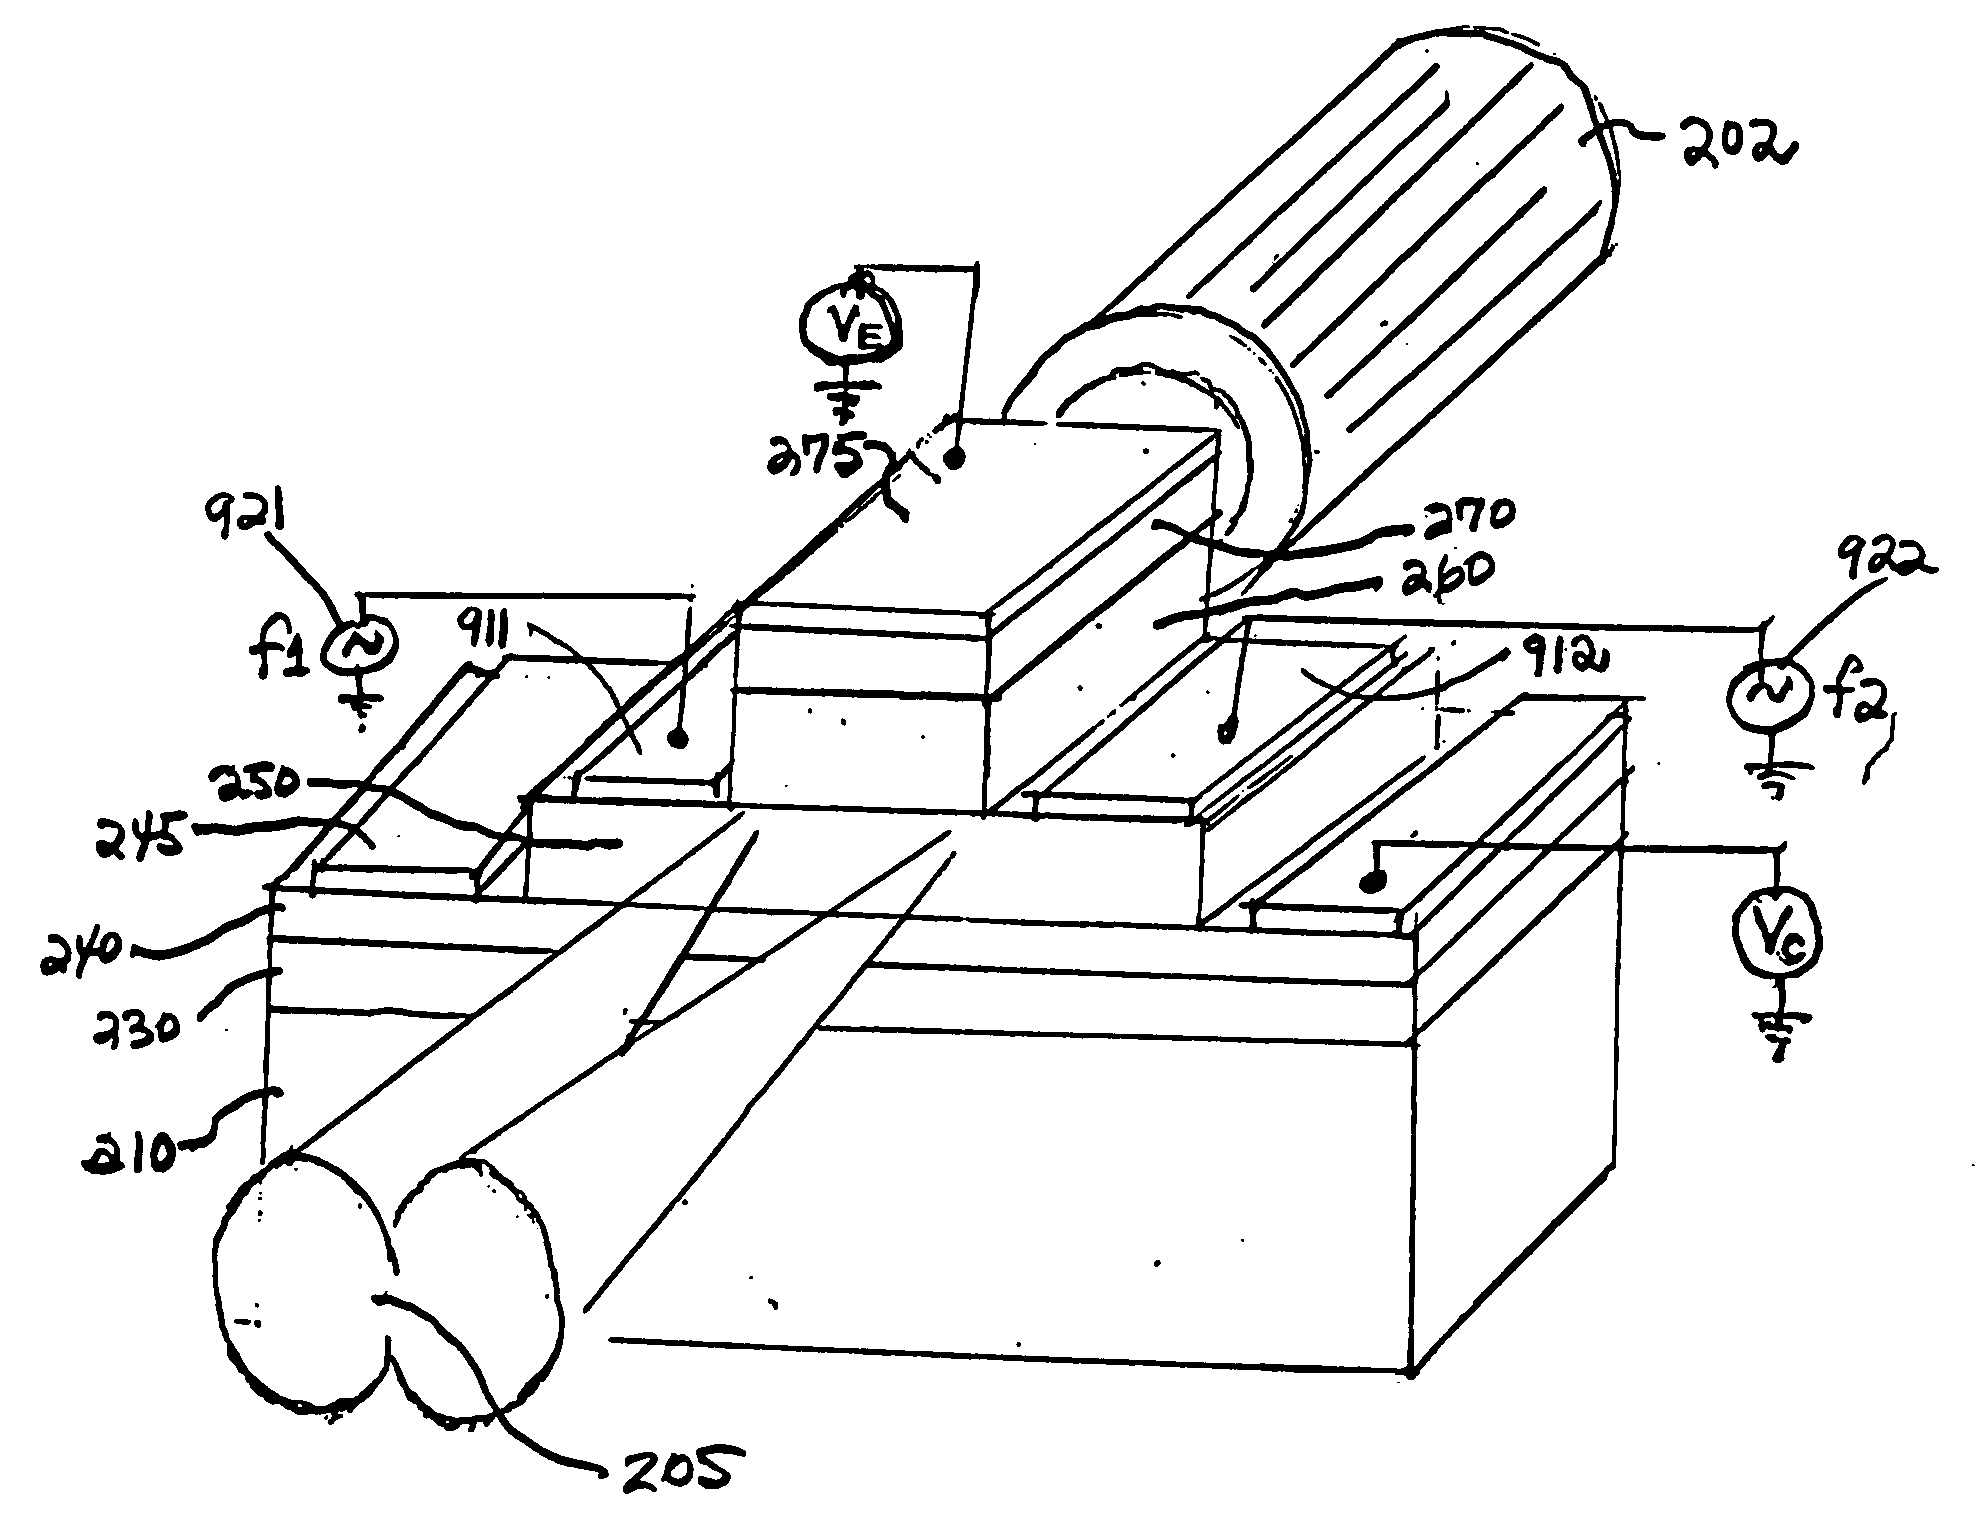 Semiconductor light emitting devices and methods